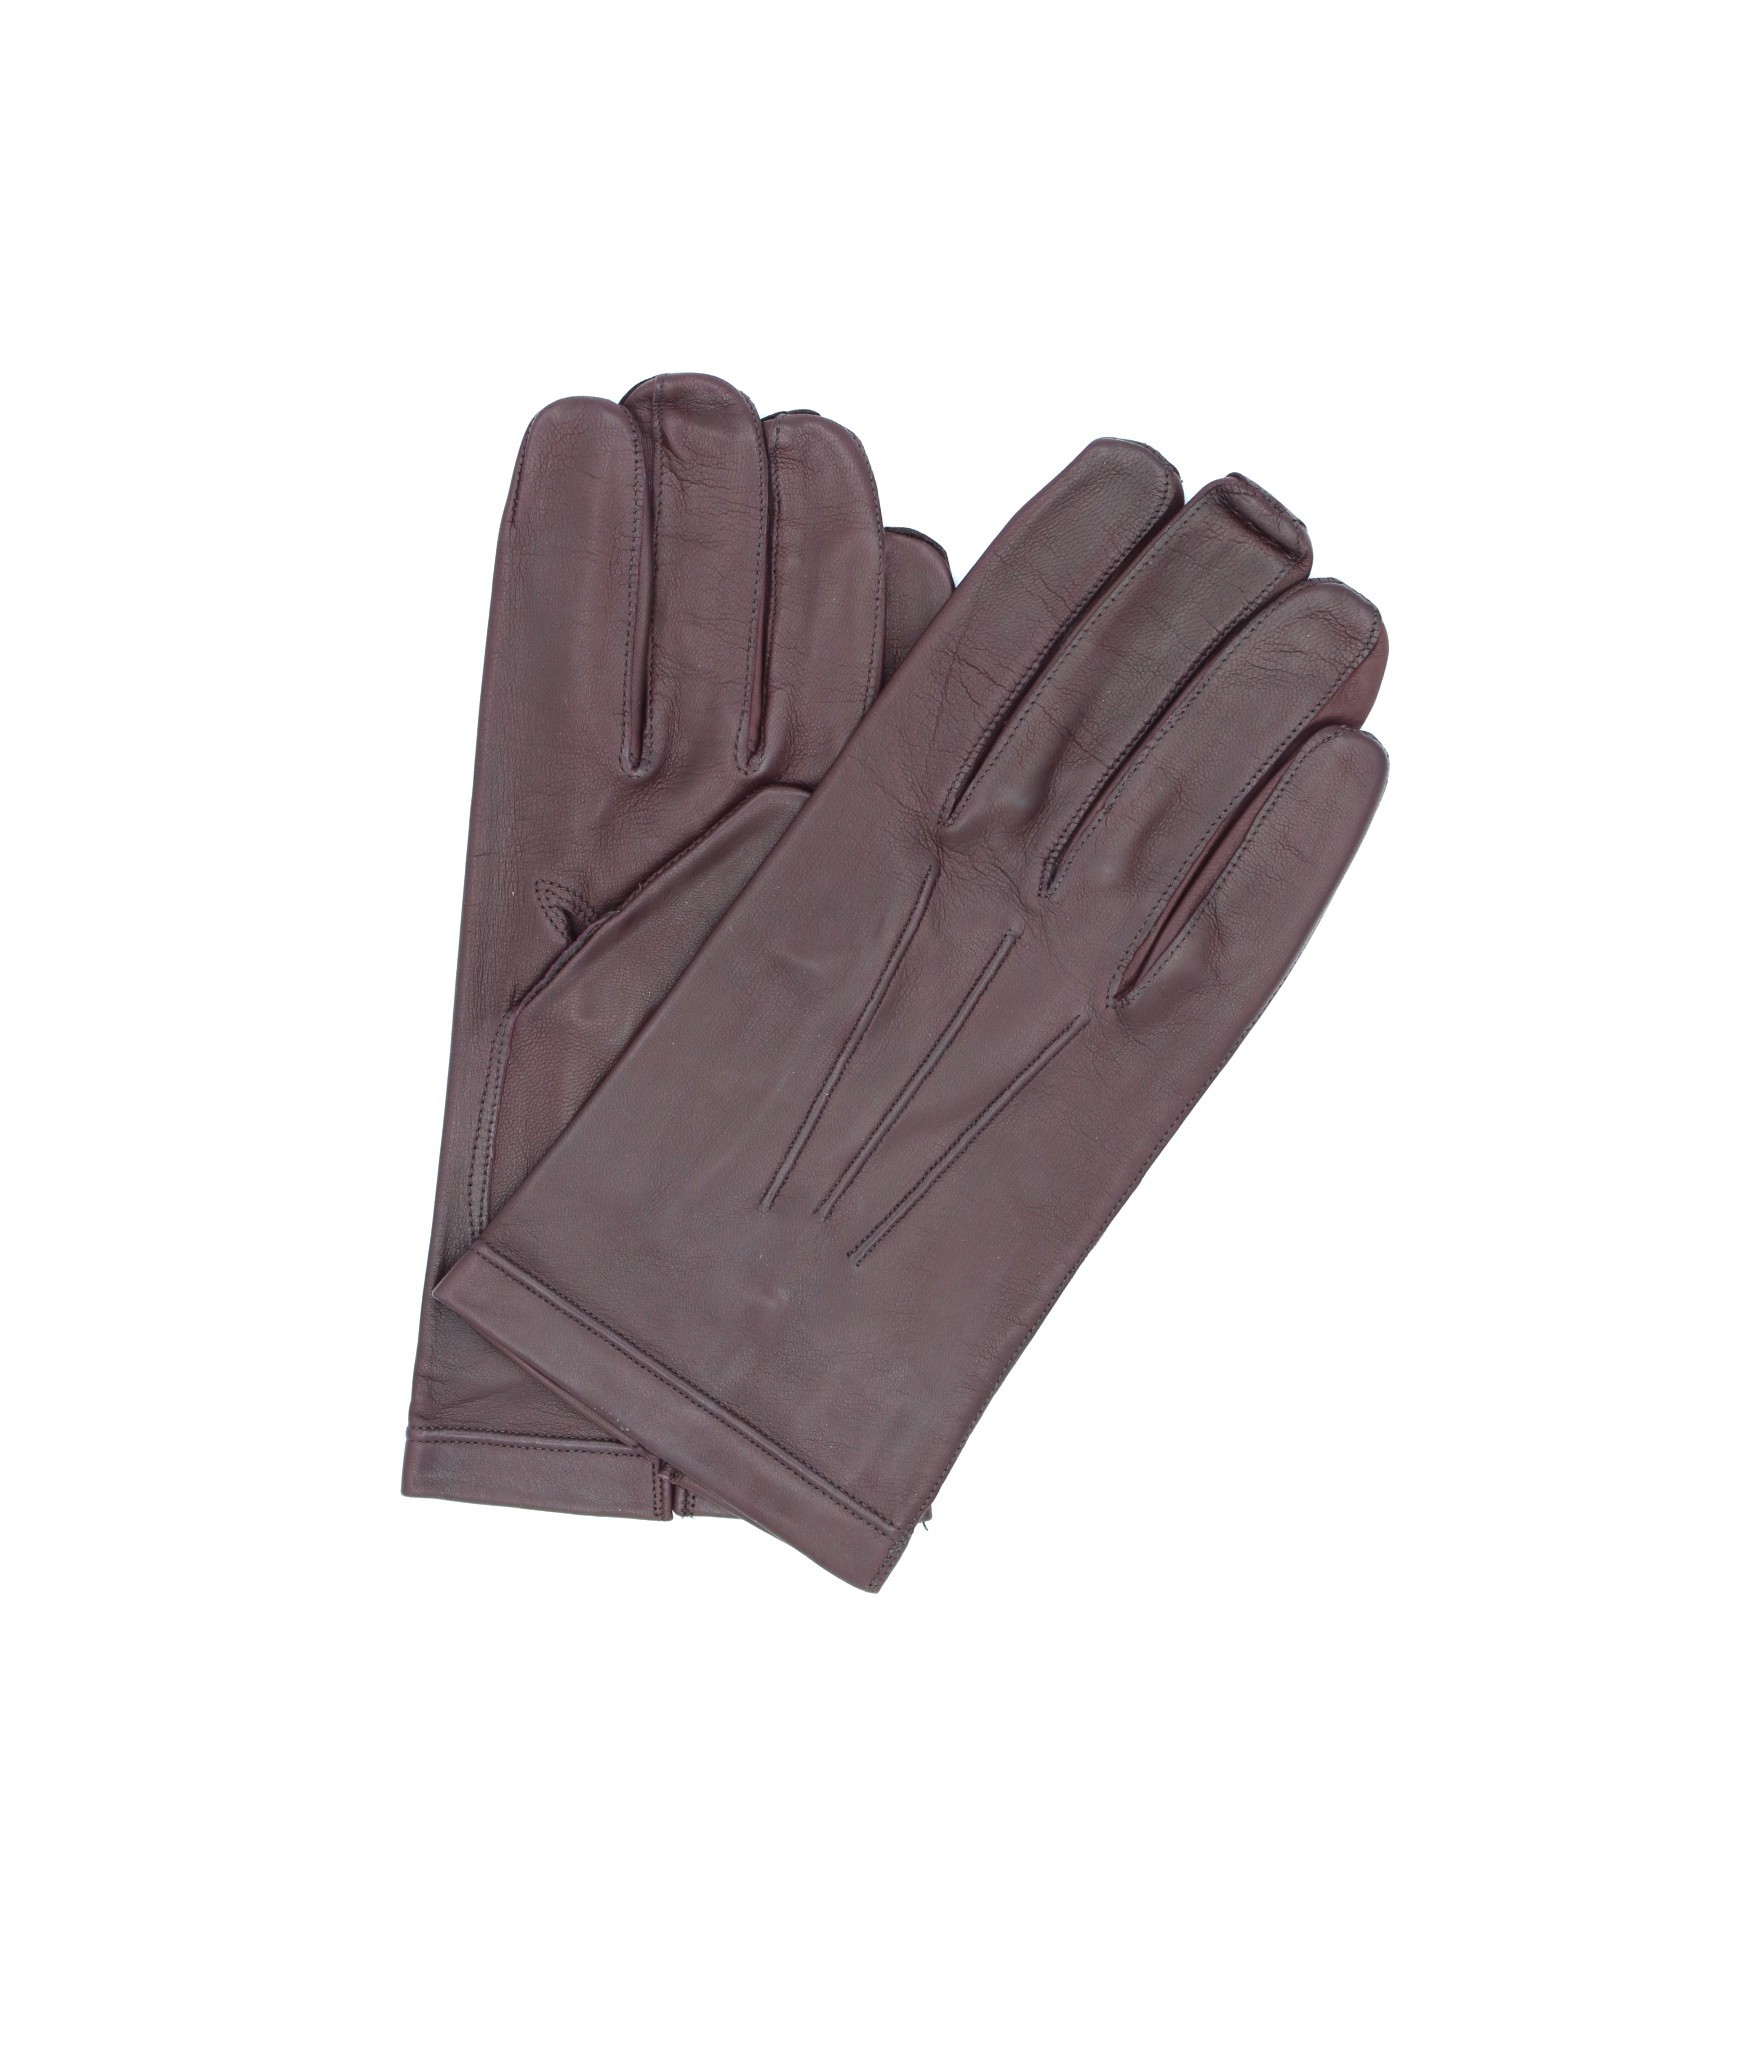 1292 Classic Kid Leather Gloves Silk Lined Bordeaux 